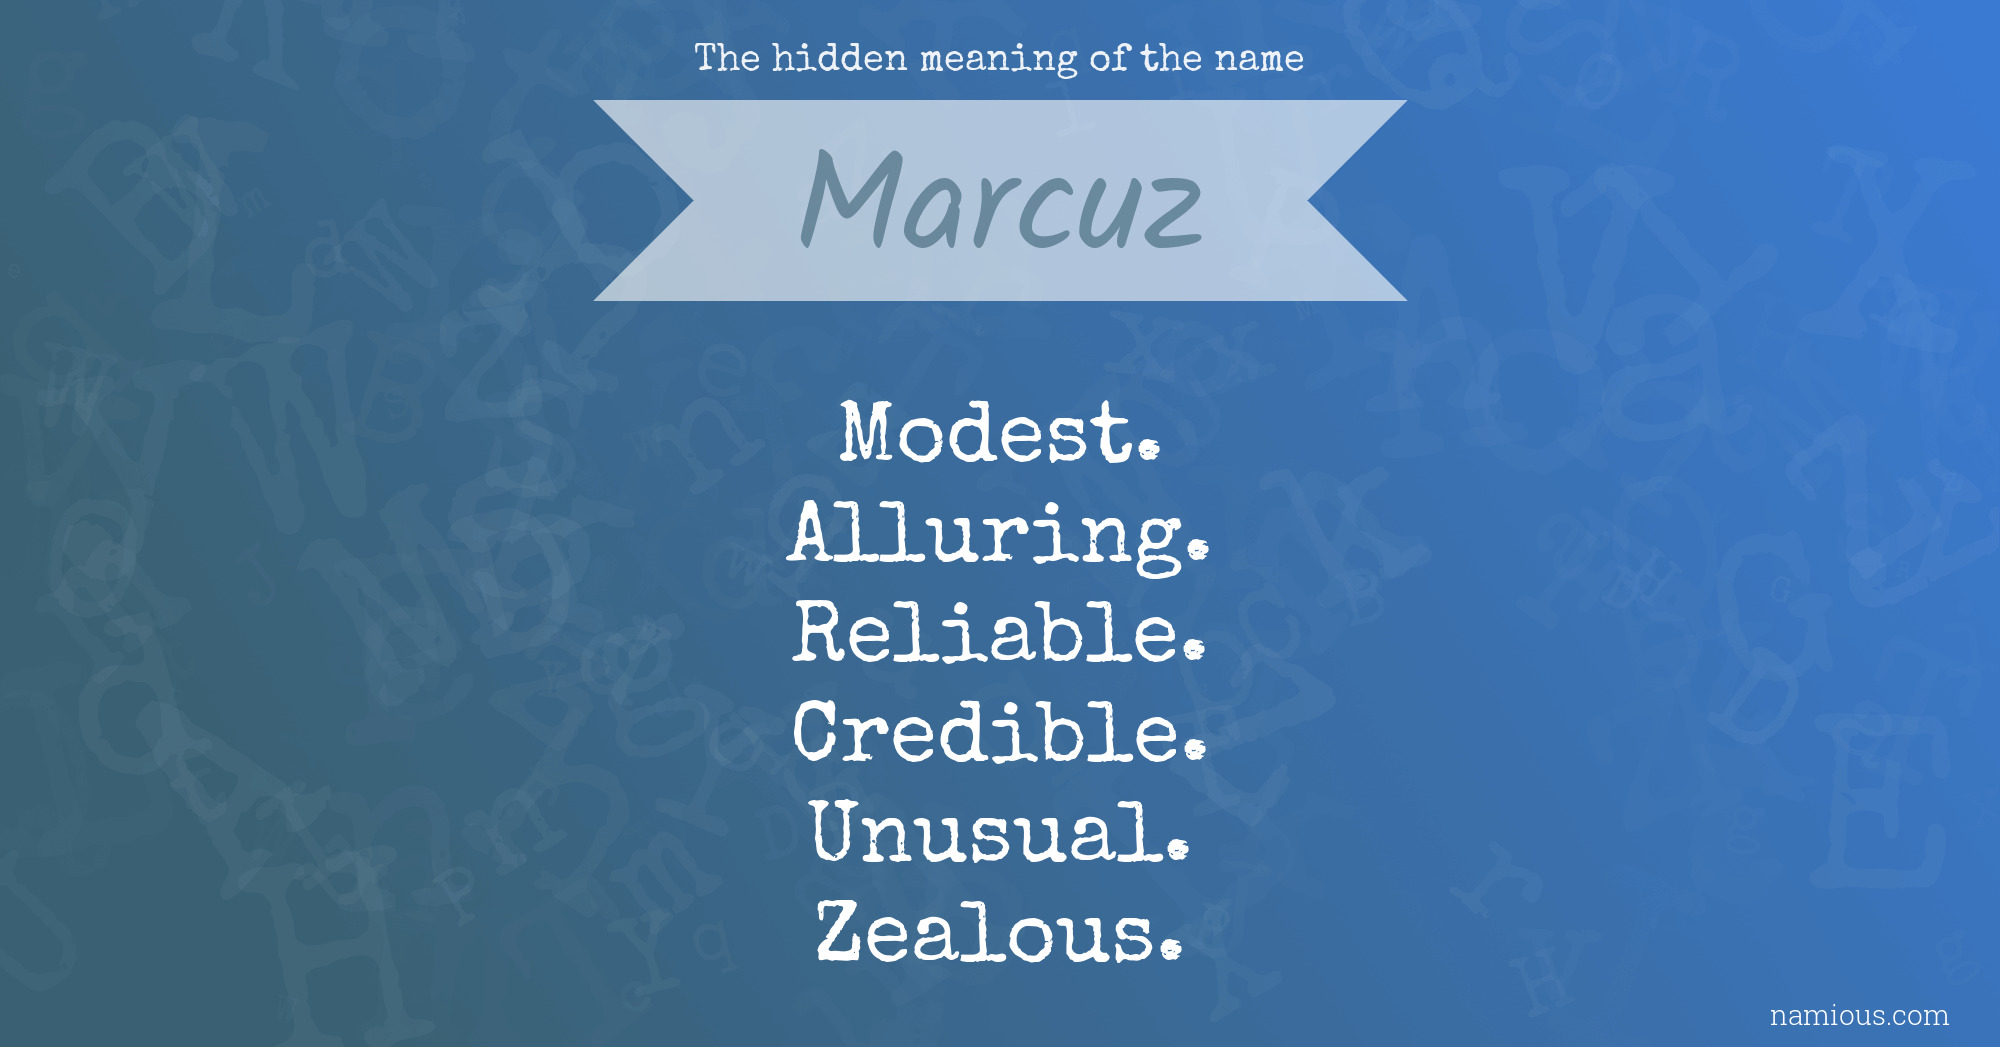 The hidden meaning of the name Marcuz